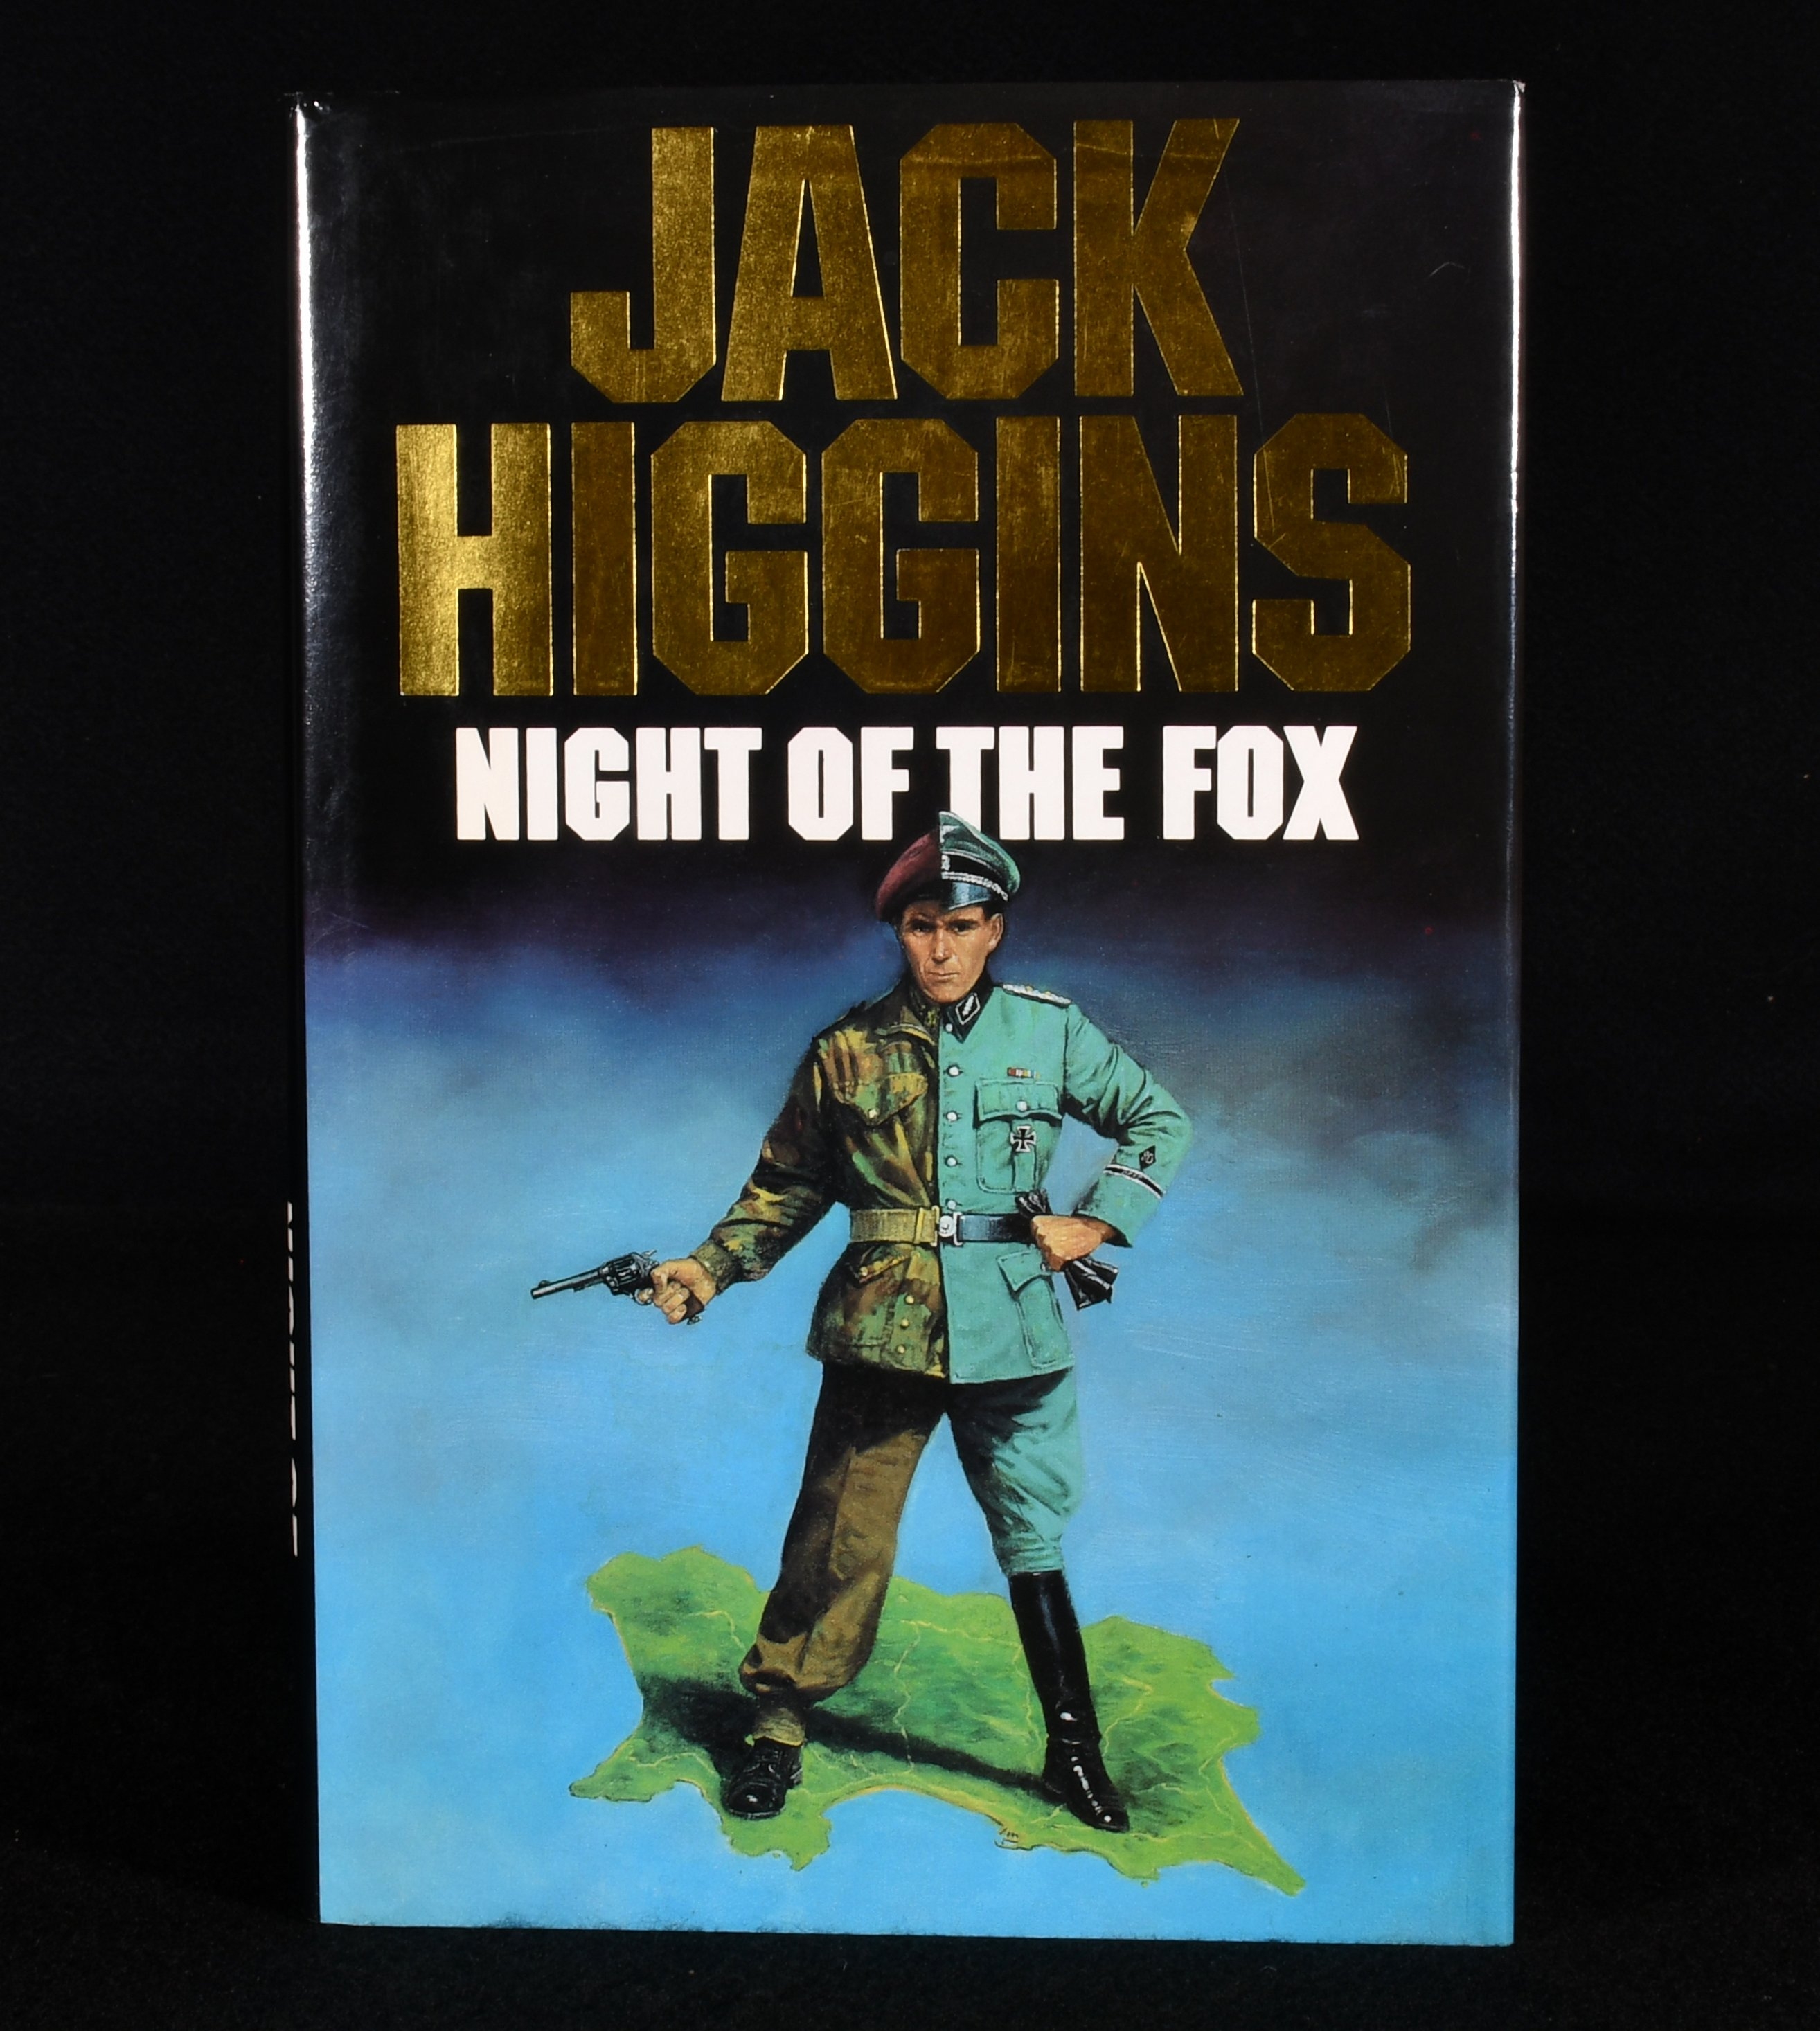 Night of the Fox - Jack Higgins; [Henry Patterson]